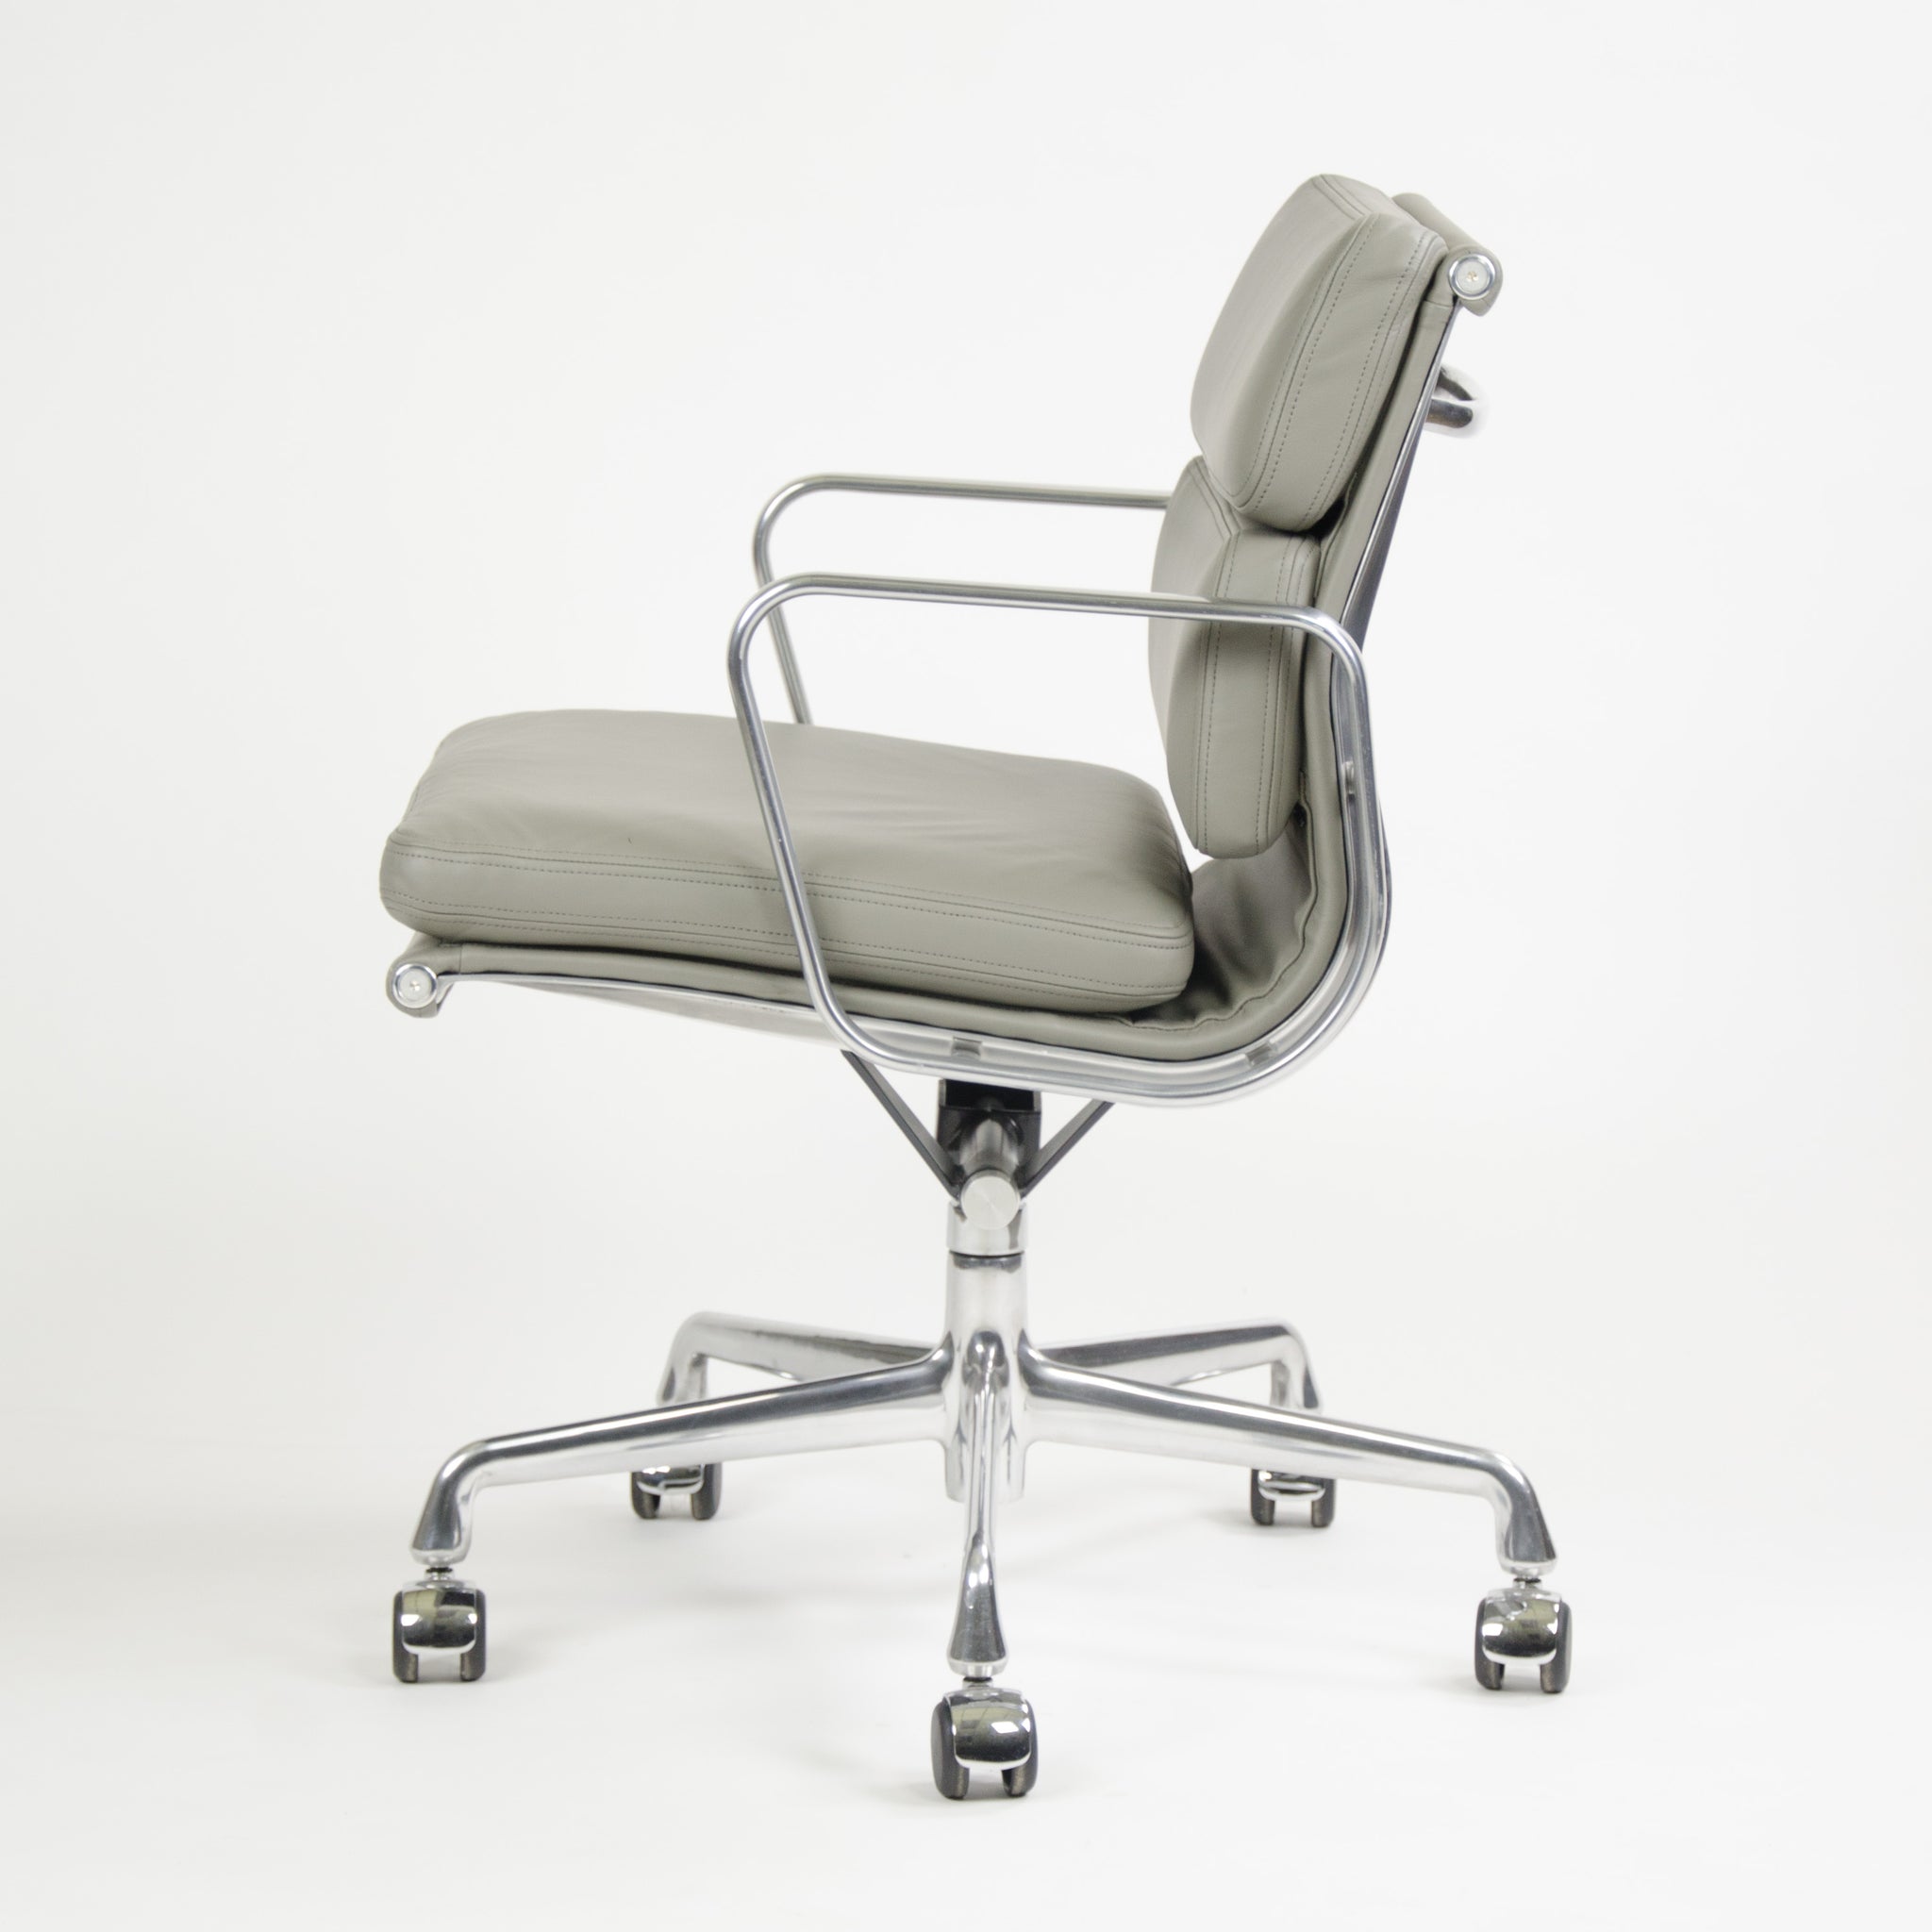 SOLD 2011 Herman Miller Eames Aluminum Group Soft Pad Desk Chair in Grey Leather 8x Available